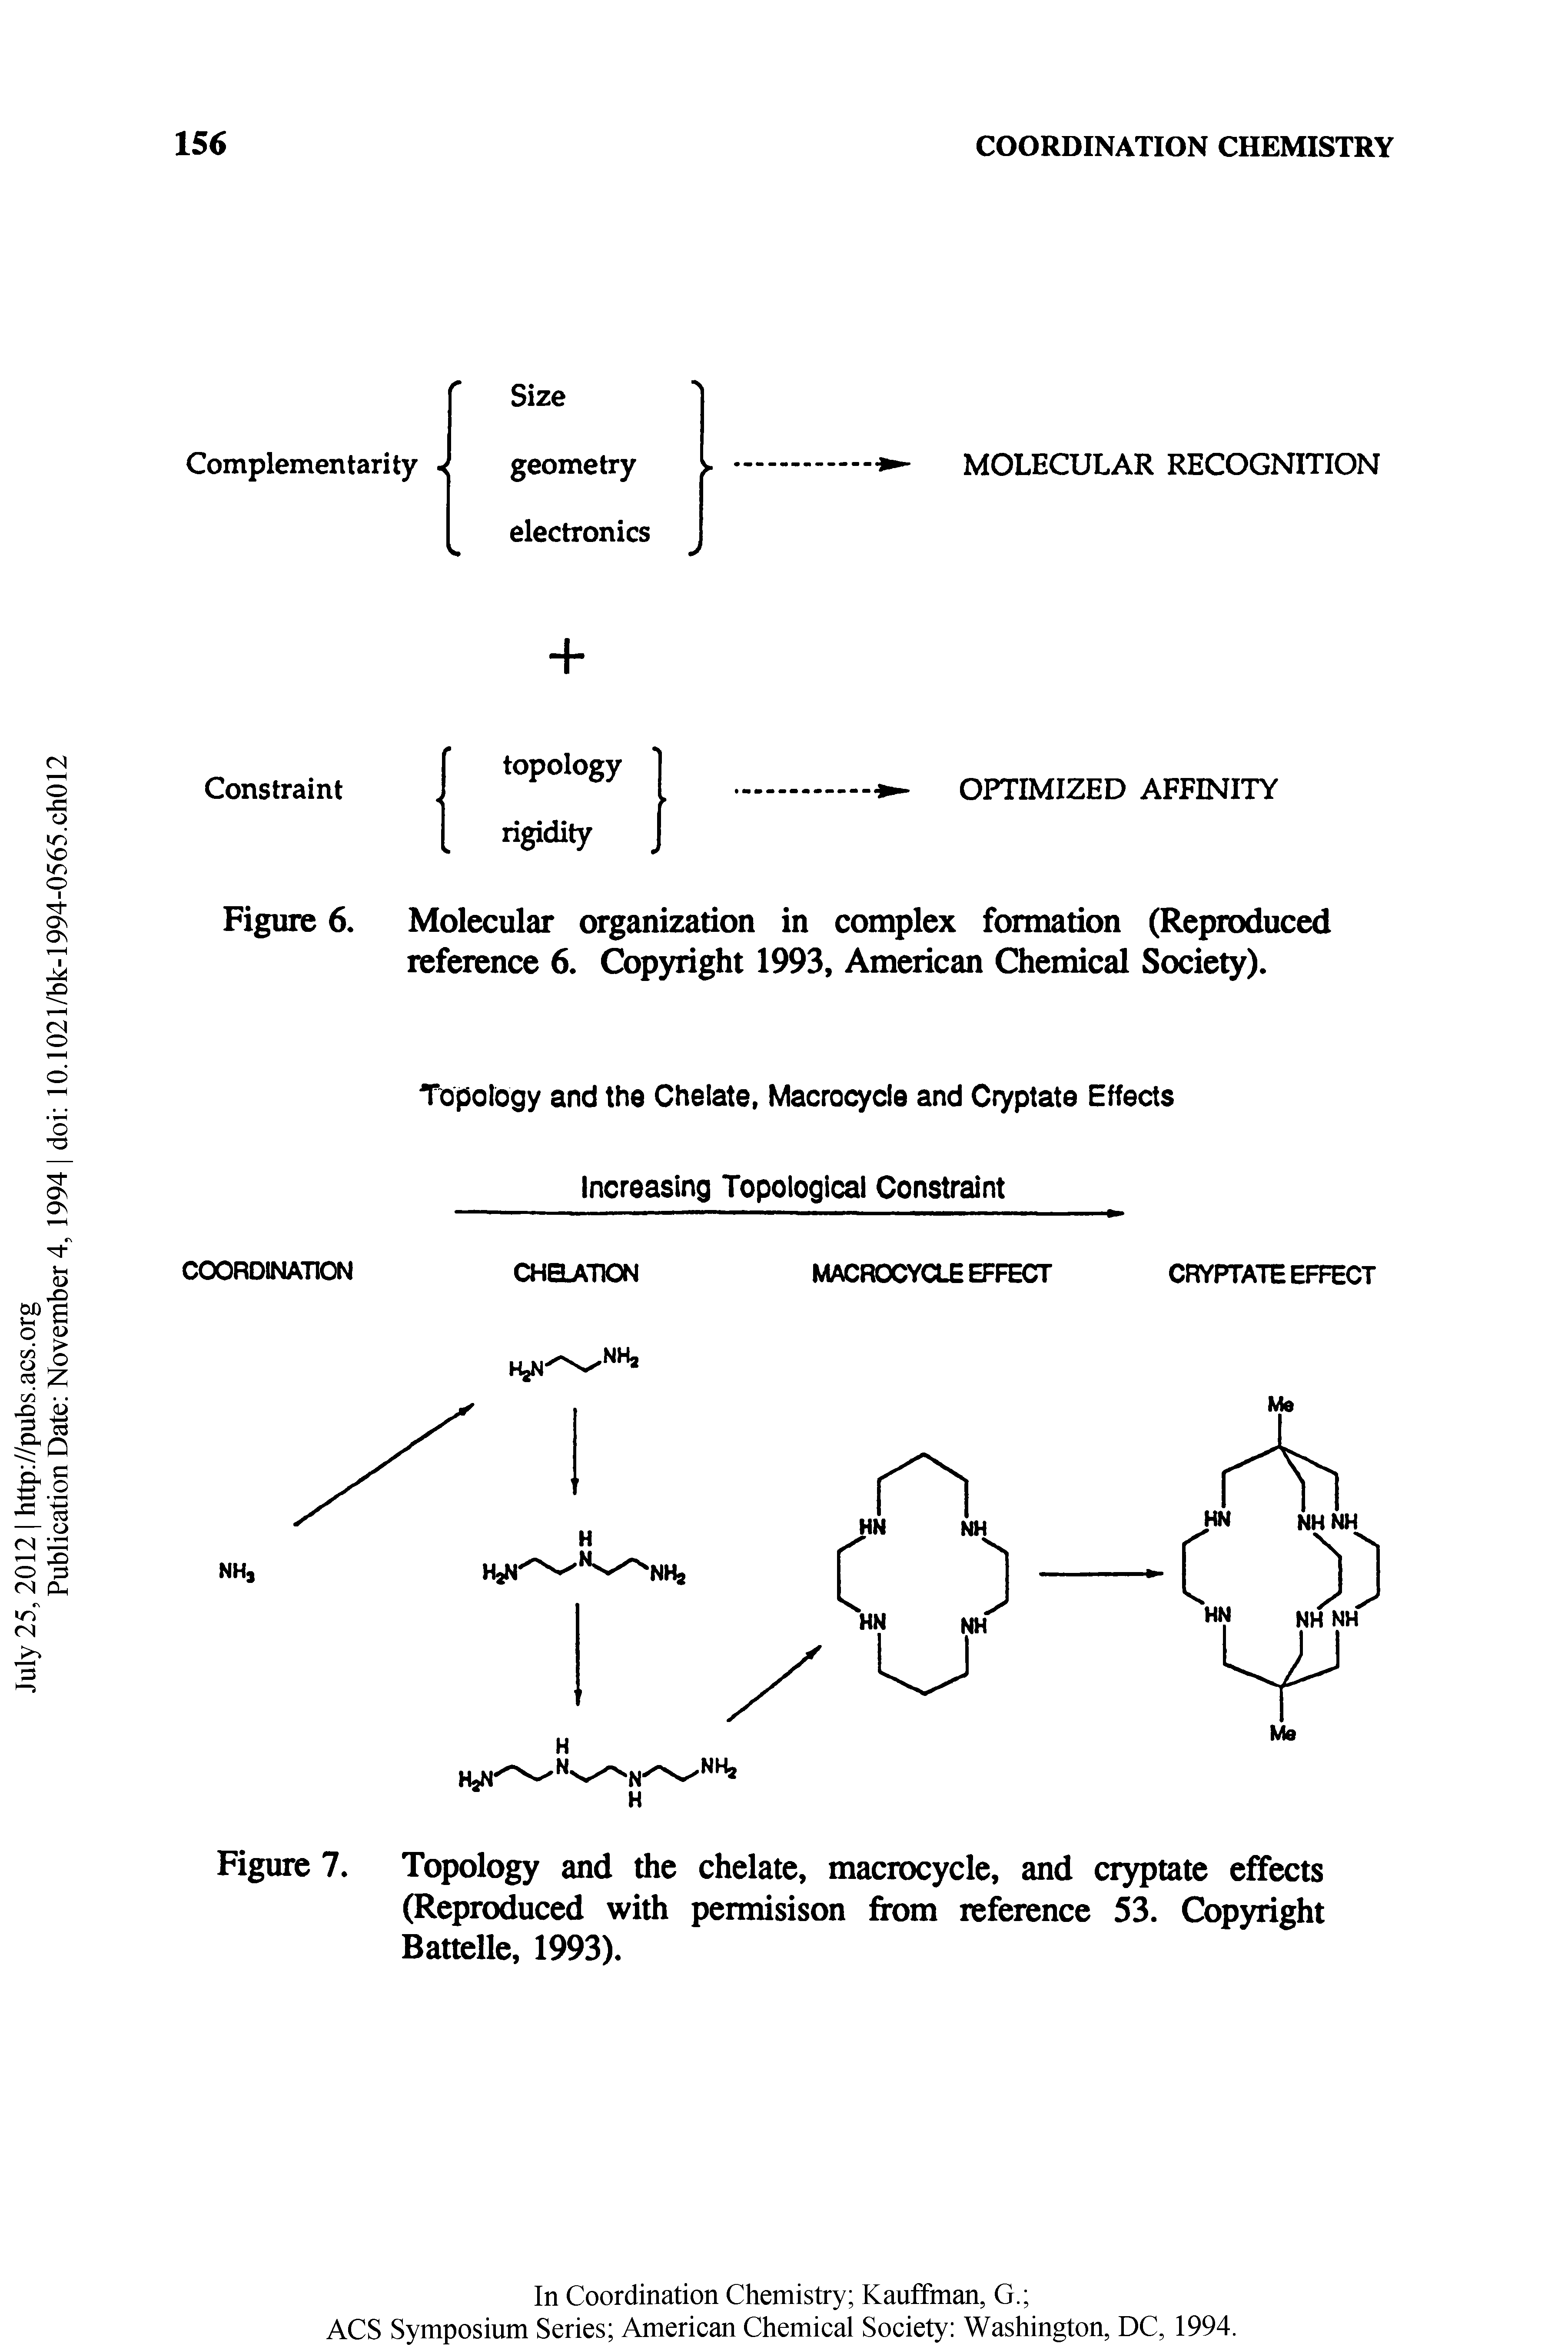 Figure 7. Topology and the chelate, macrocycle, and cryptate effects (Reproduced with permisison from reference 53. Copyright Battelle, 1993).